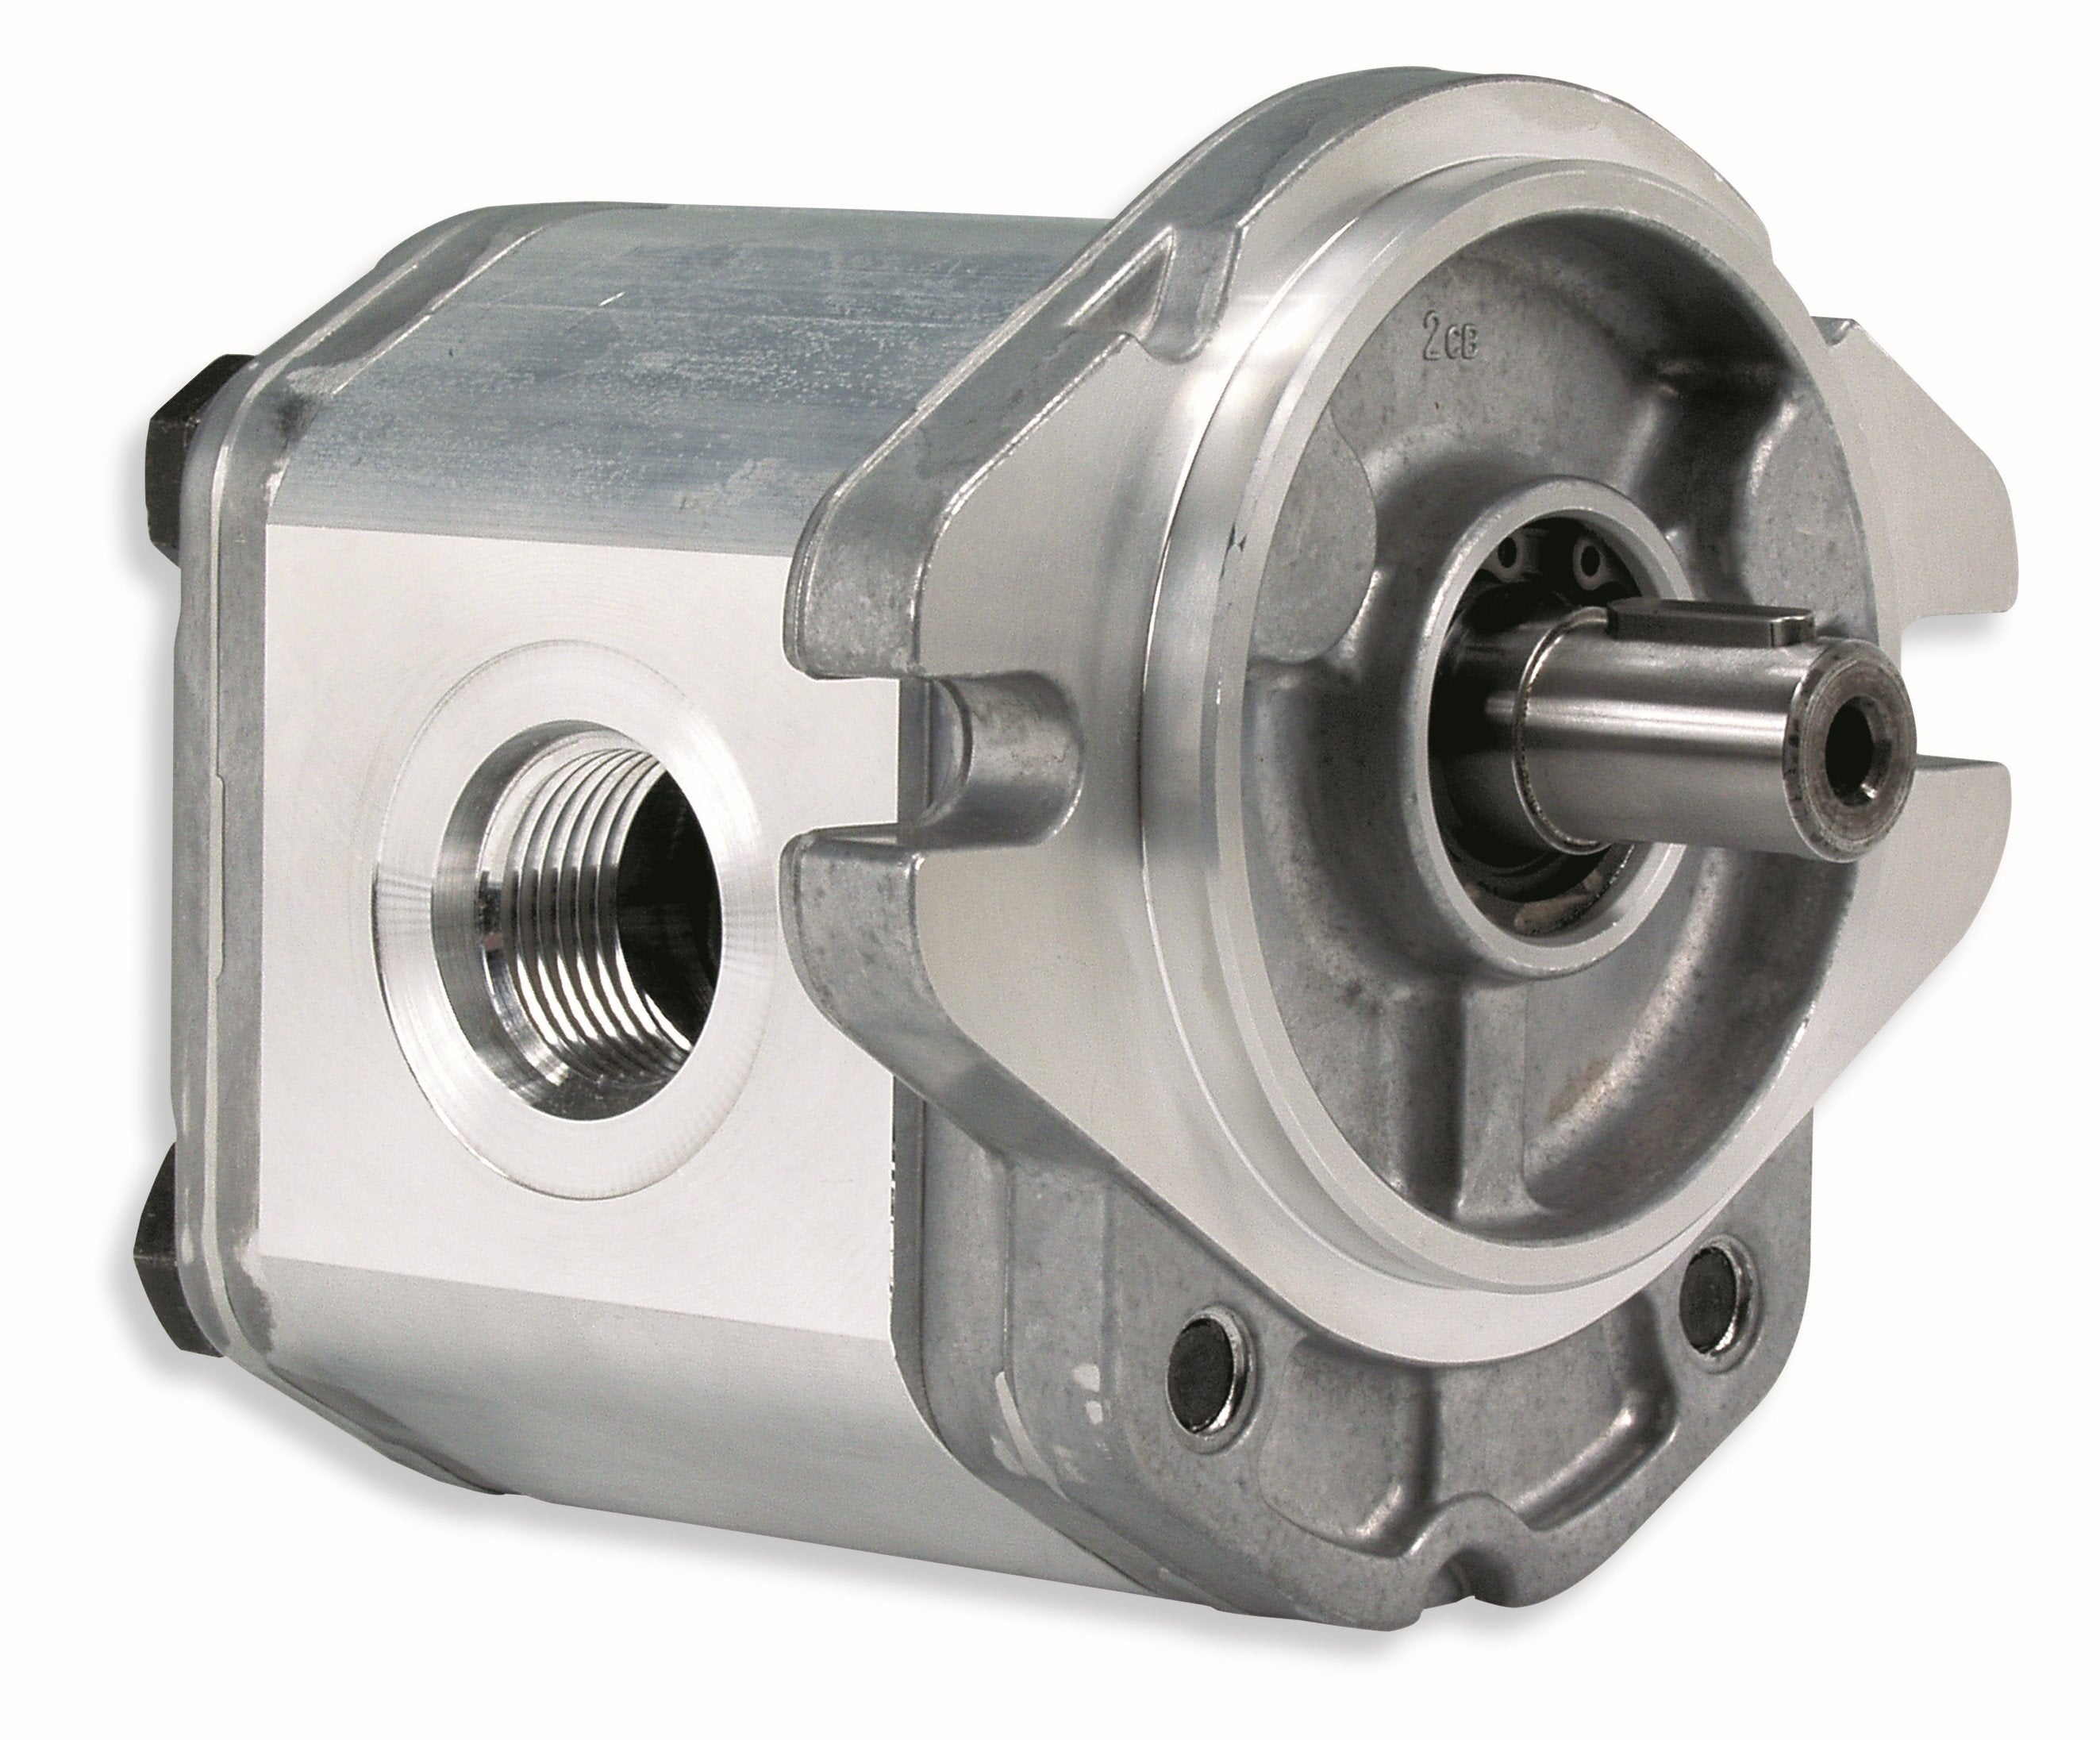 GHM3A-R-94-S1-E4 : Marzocchi Gear Motor, Bidirectional, 61cc, 3045psi rated, 2800RPM, 1.25" Code 61 ports, 13T 16/32DP Splined Shaft